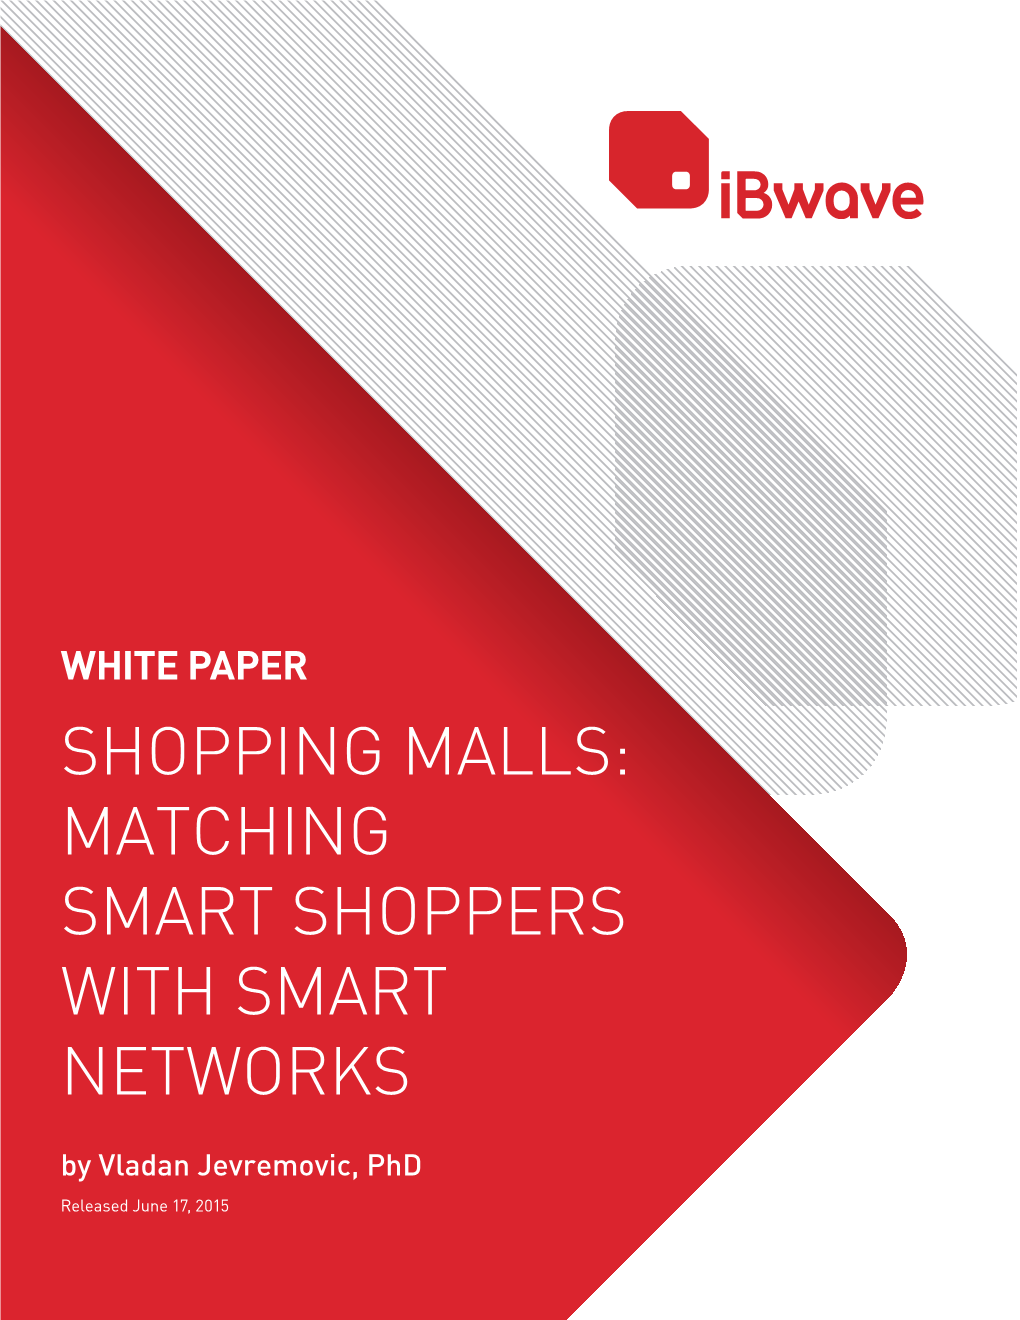 SHOPPING MALLS: MATCHING SMART SHOPPERS with SMART NETWORKS by Vladan Jevremovic, Phd